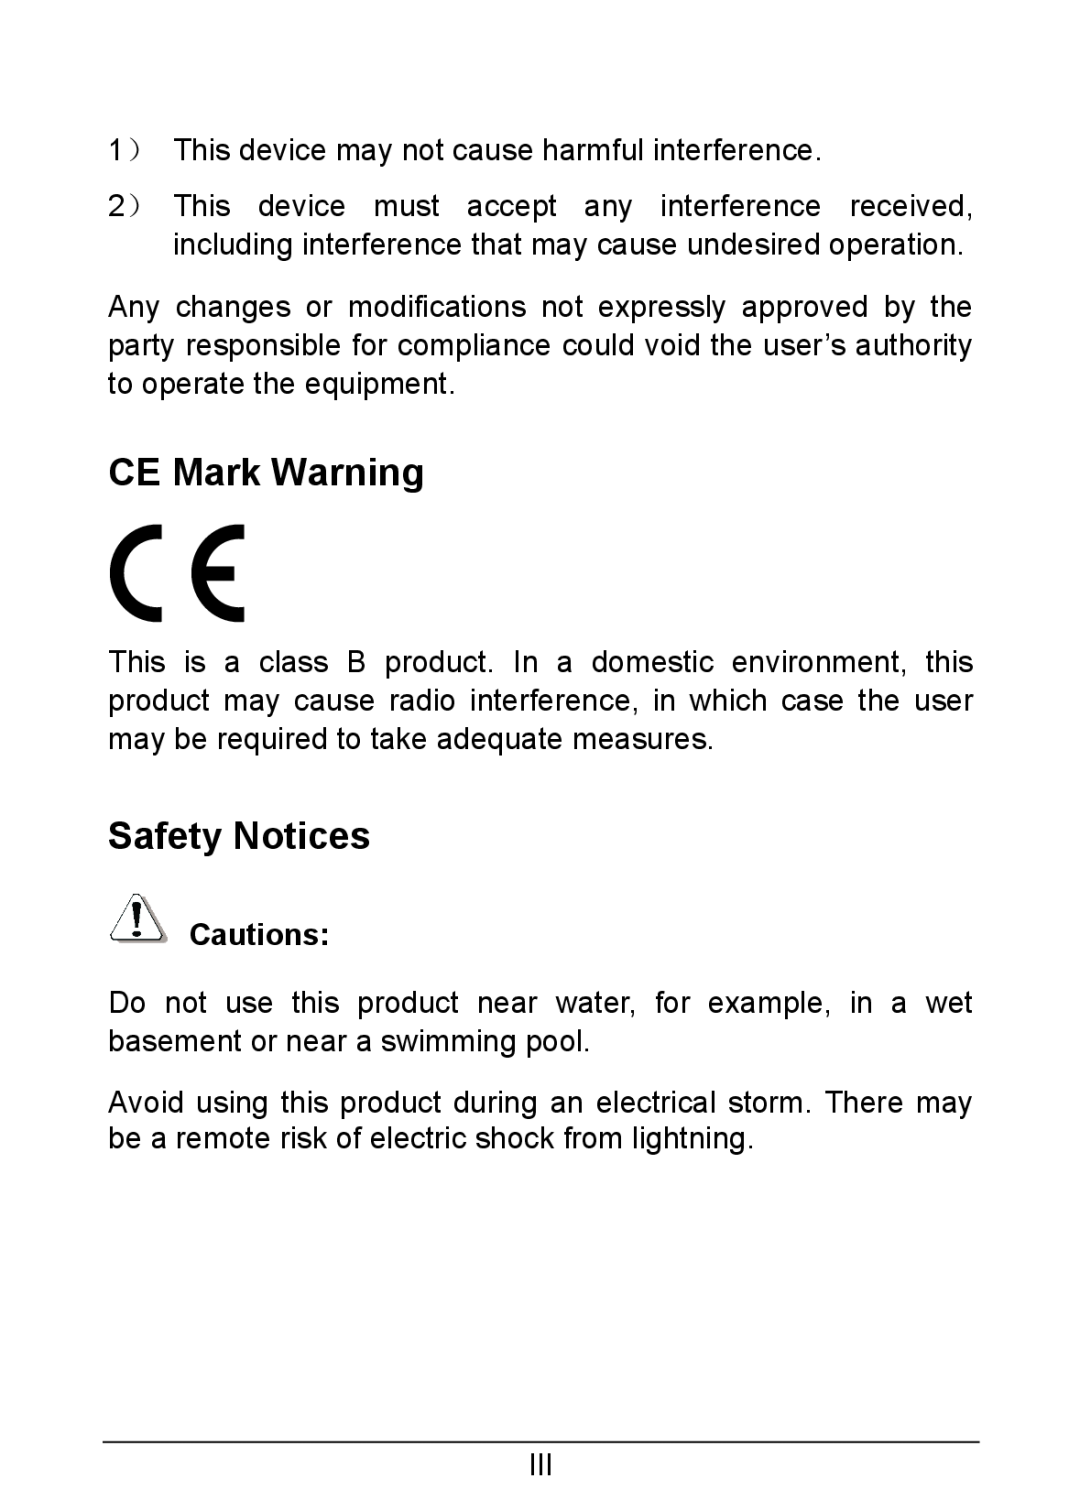 TP-Link TL-SG1005D, TL-SG1008D manual CE Mark Warning, Safety Notices, Cautions 